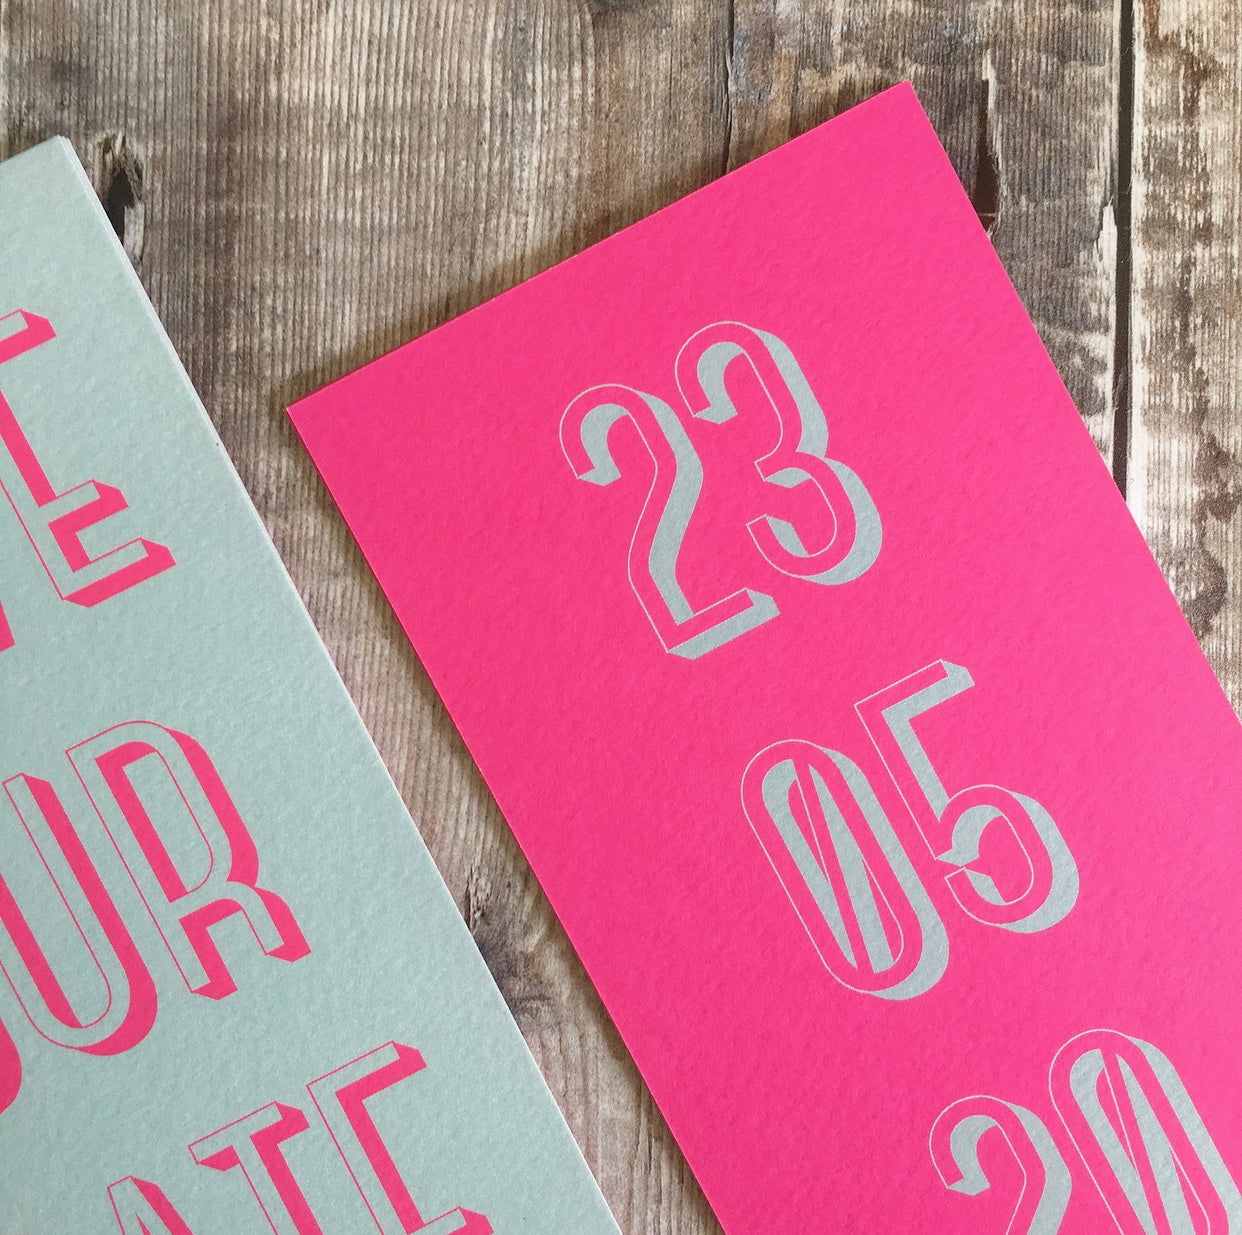 Close-up of the textured card. Bookmark-style wedding invitation/save the date. Back view. This has a pink fluorescent background, with the date of the wedding in a teal colour. The overall style is typographic and bold.